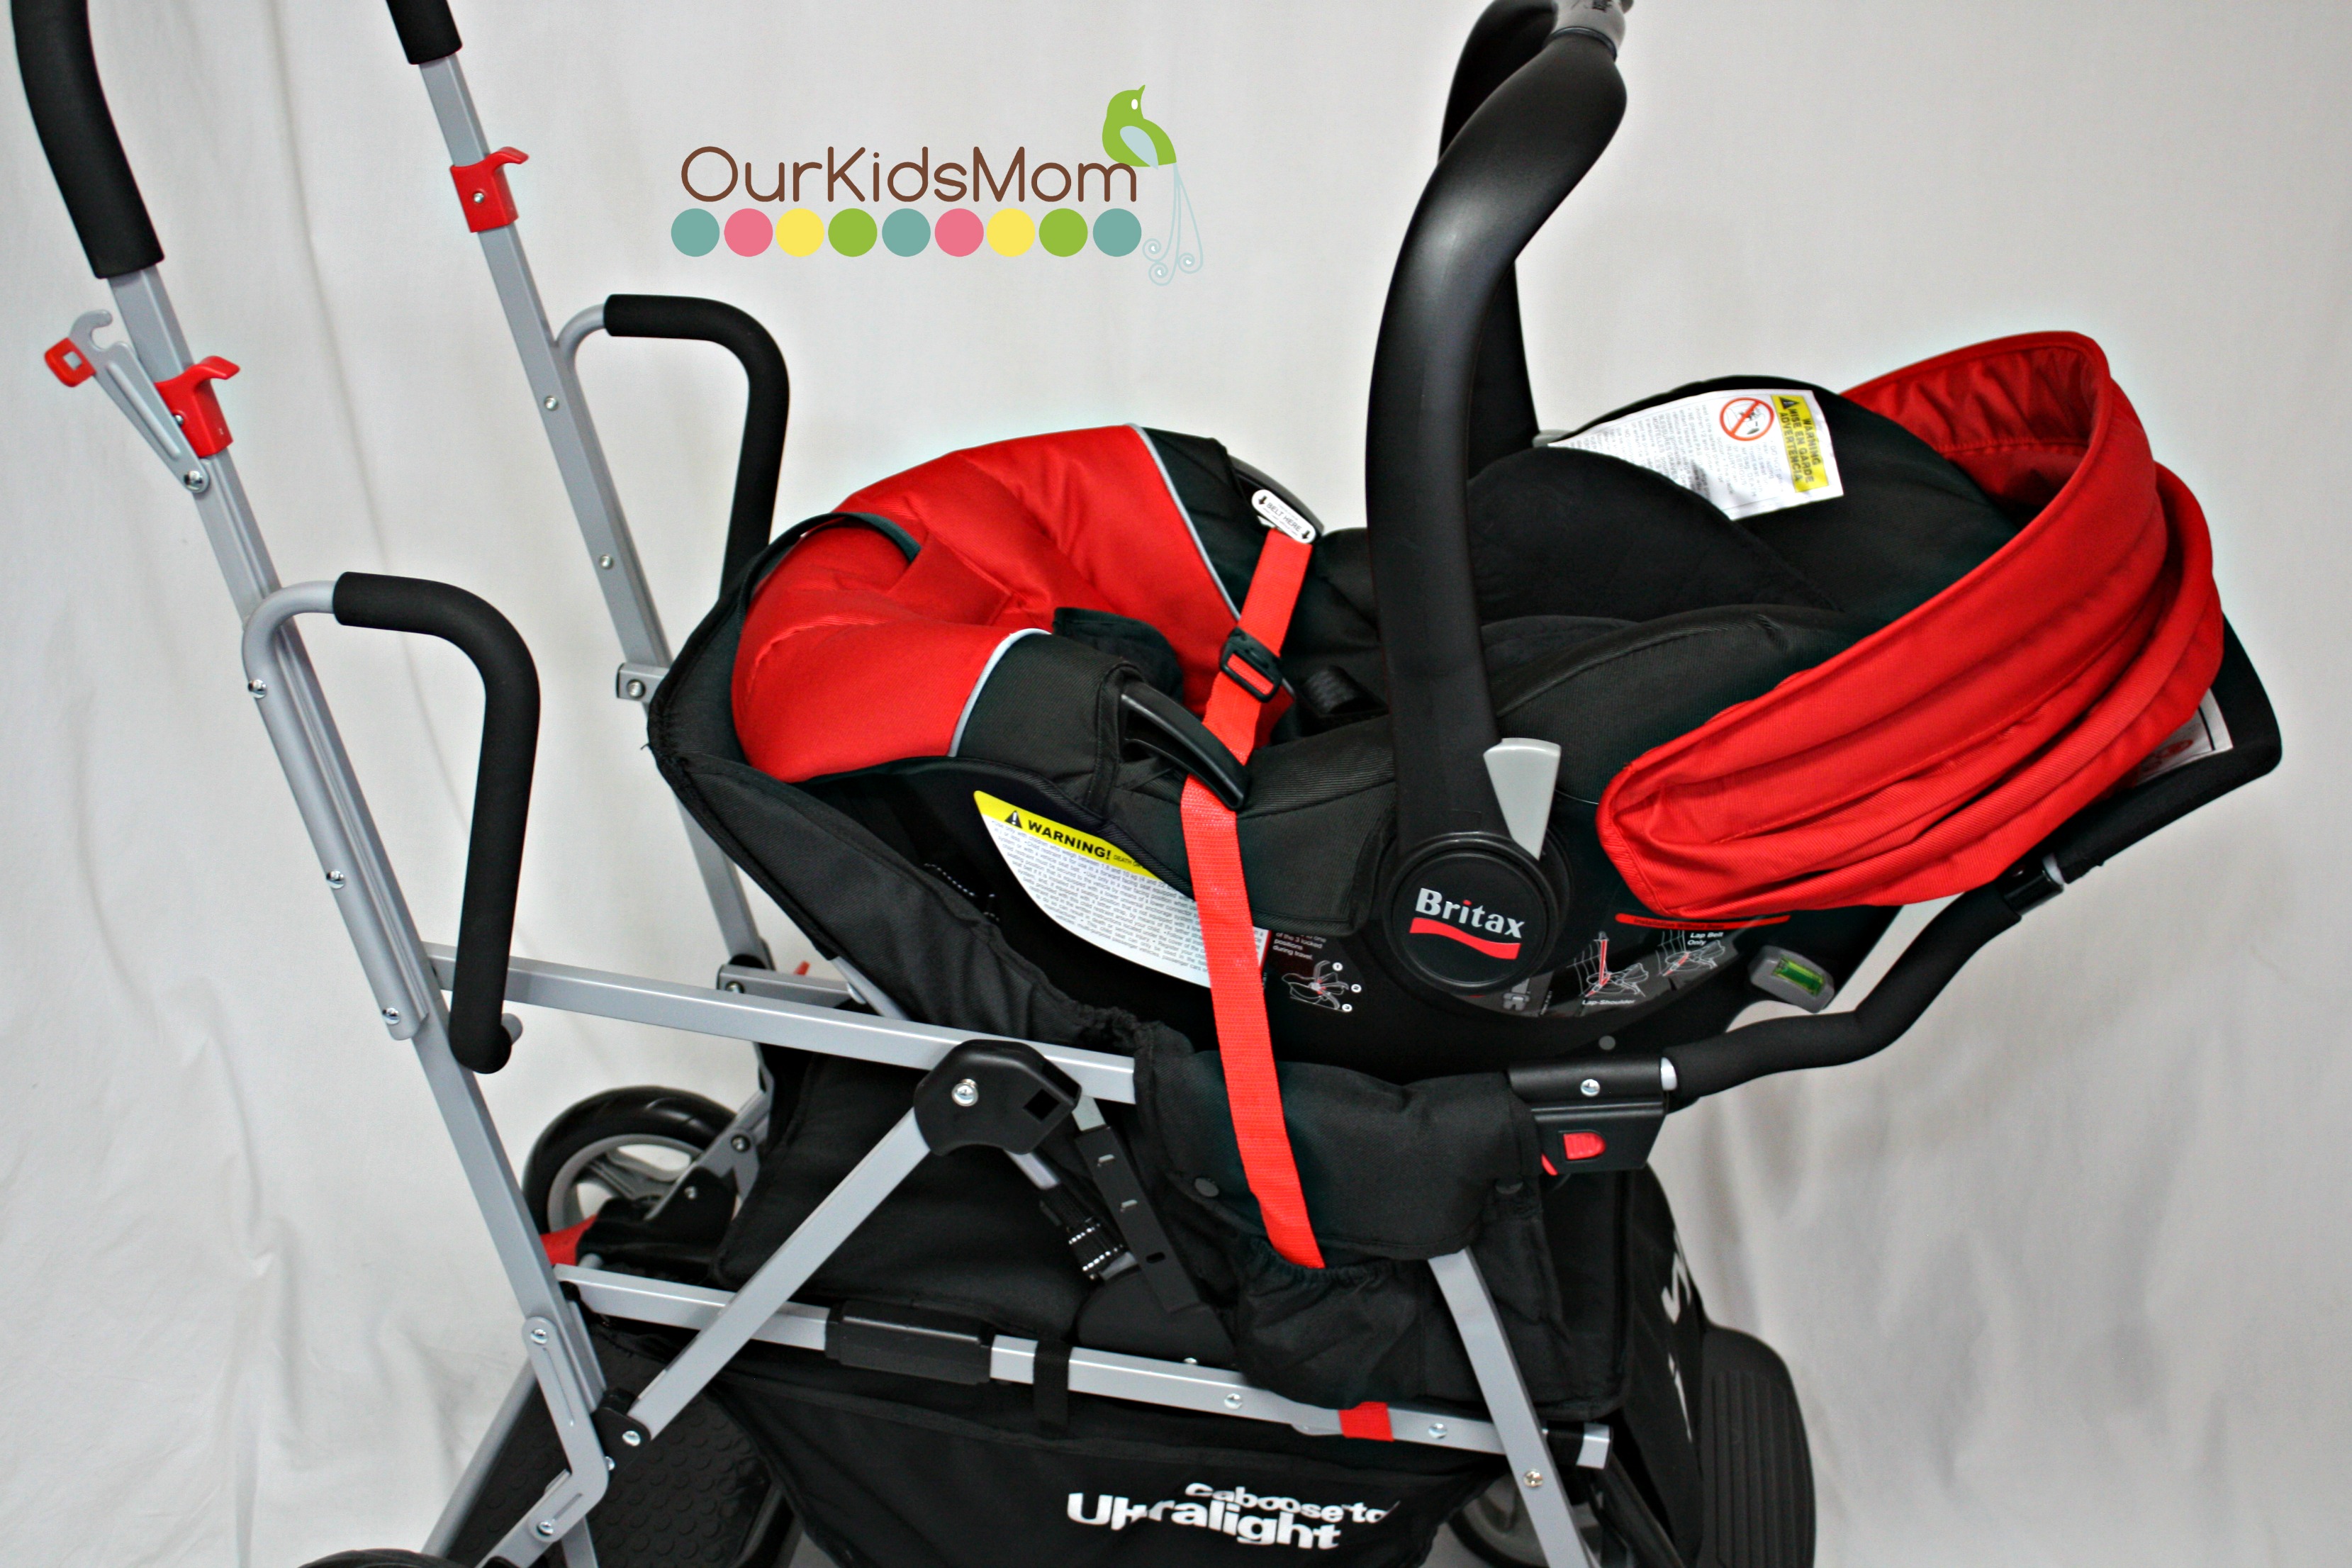 joovy strollers and car seats